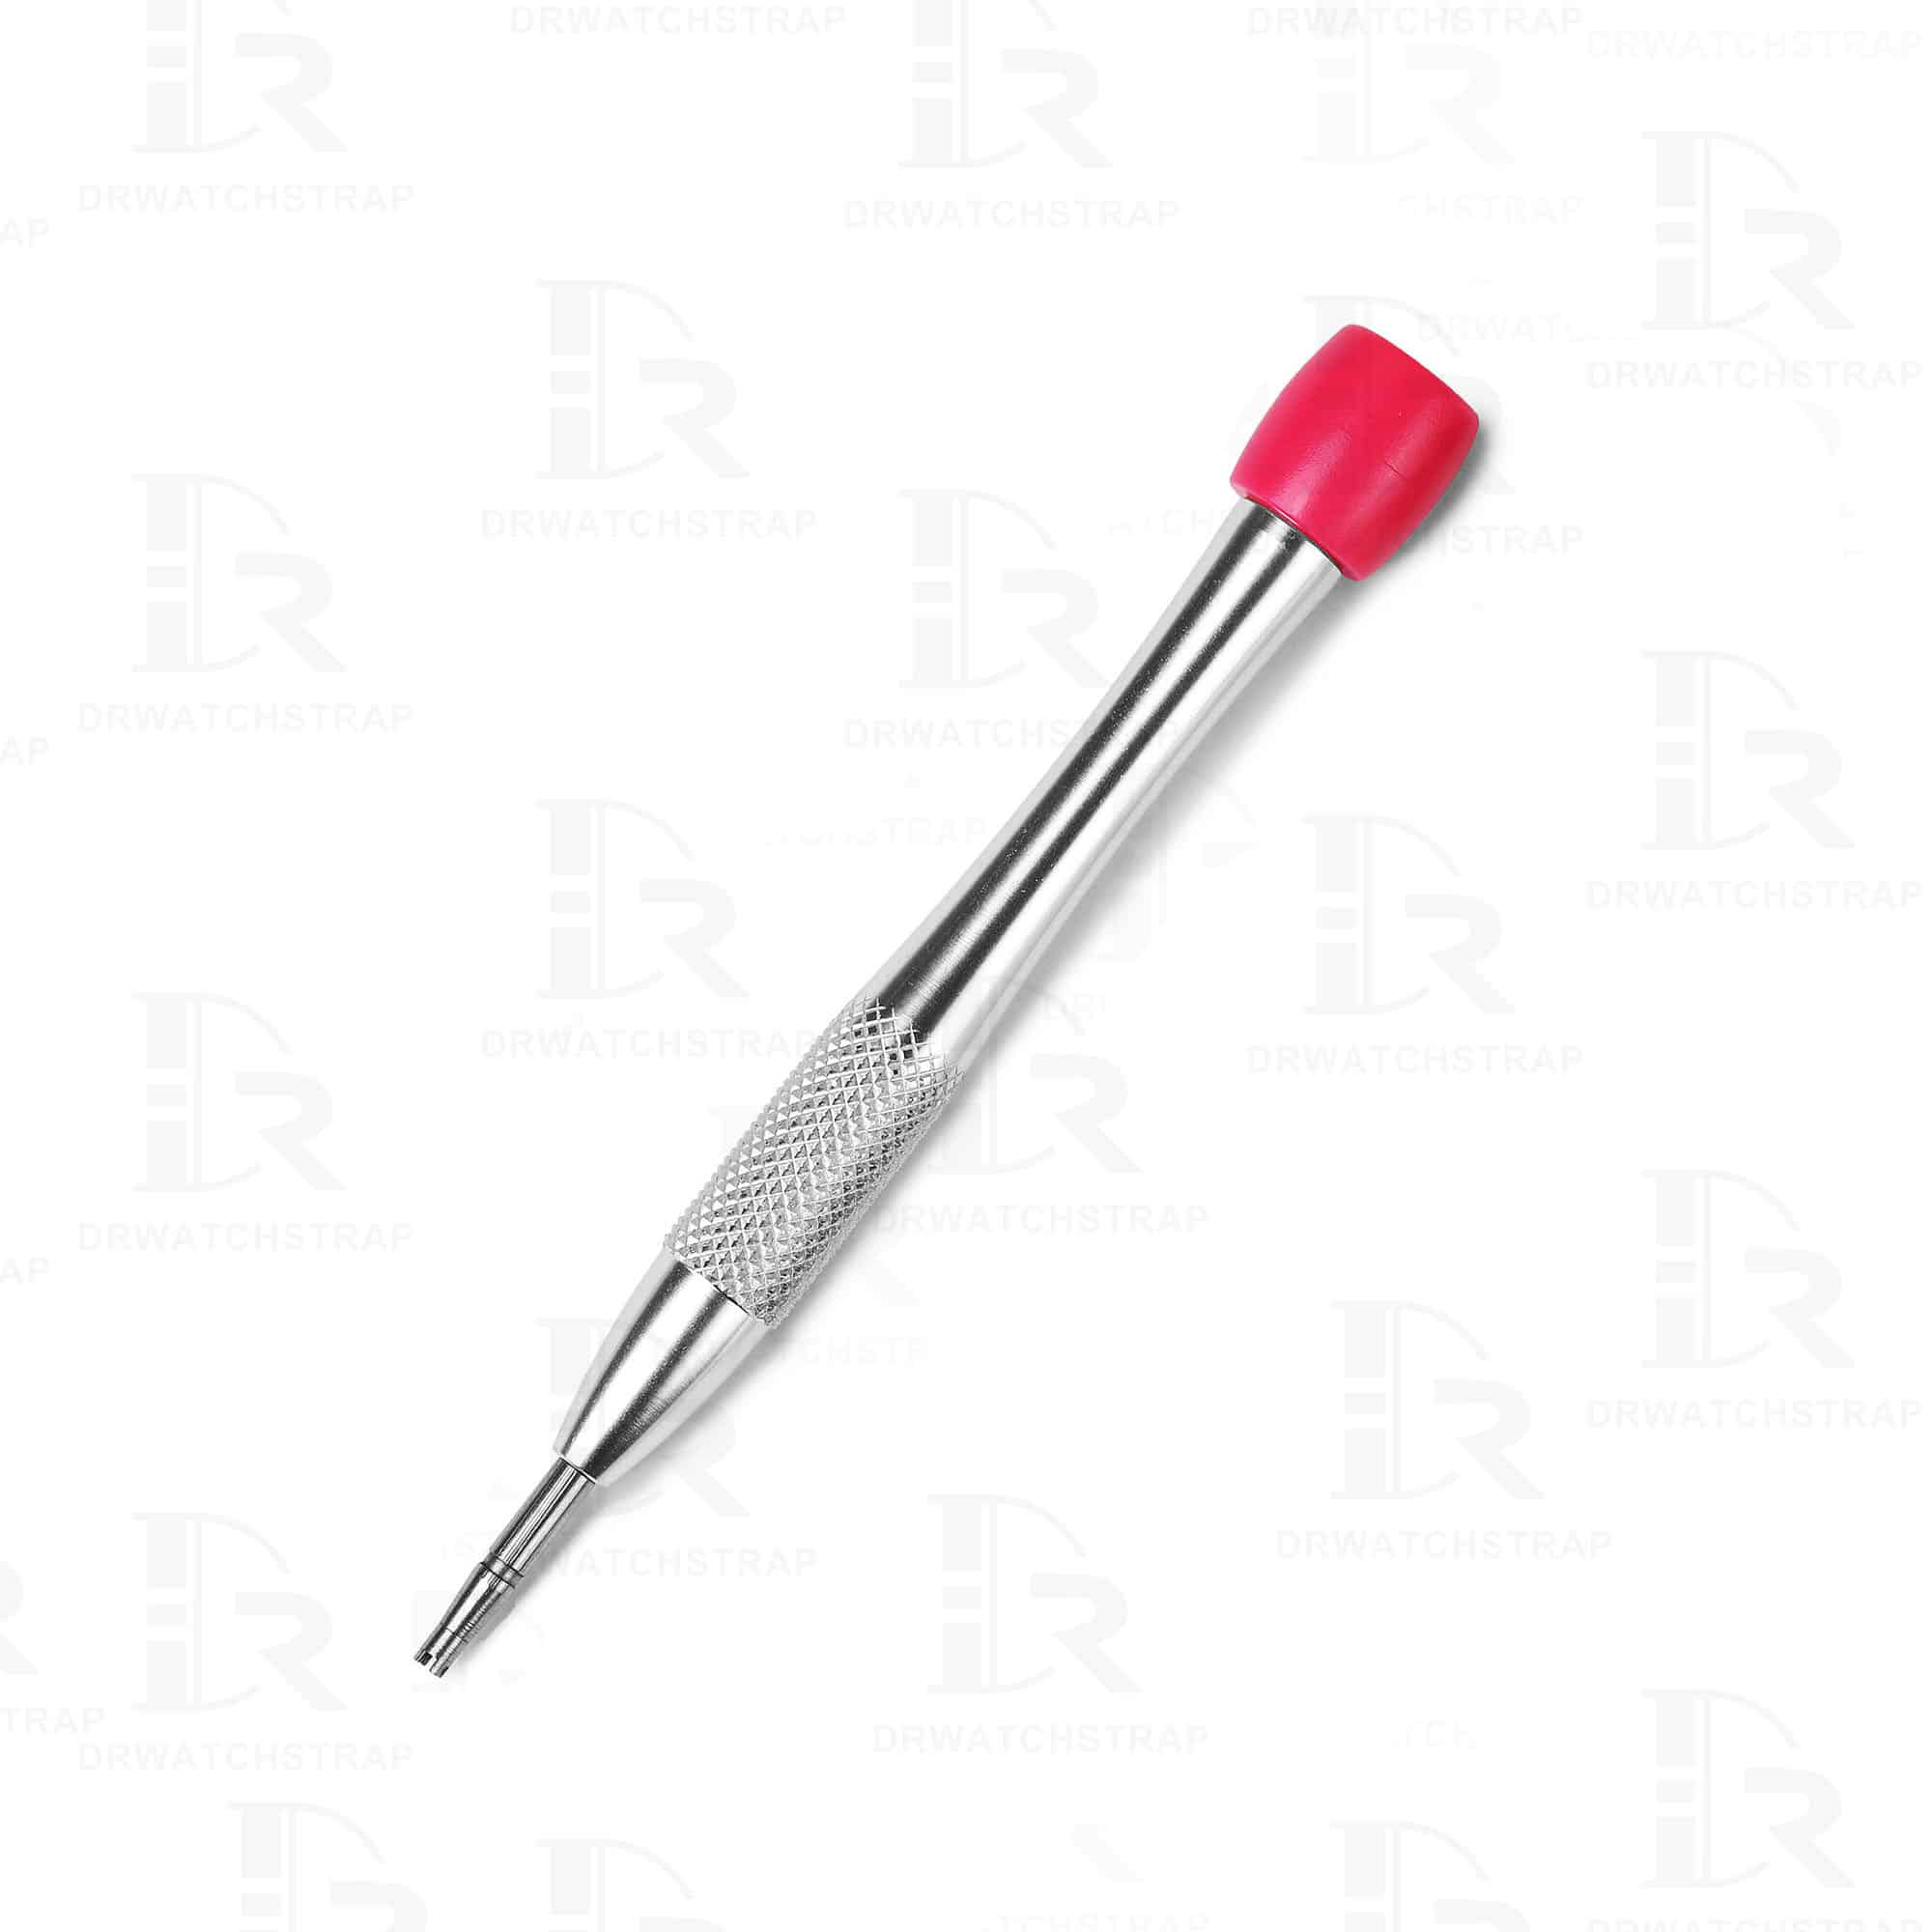 Richard Mille watch screwdriver tool for sale low price